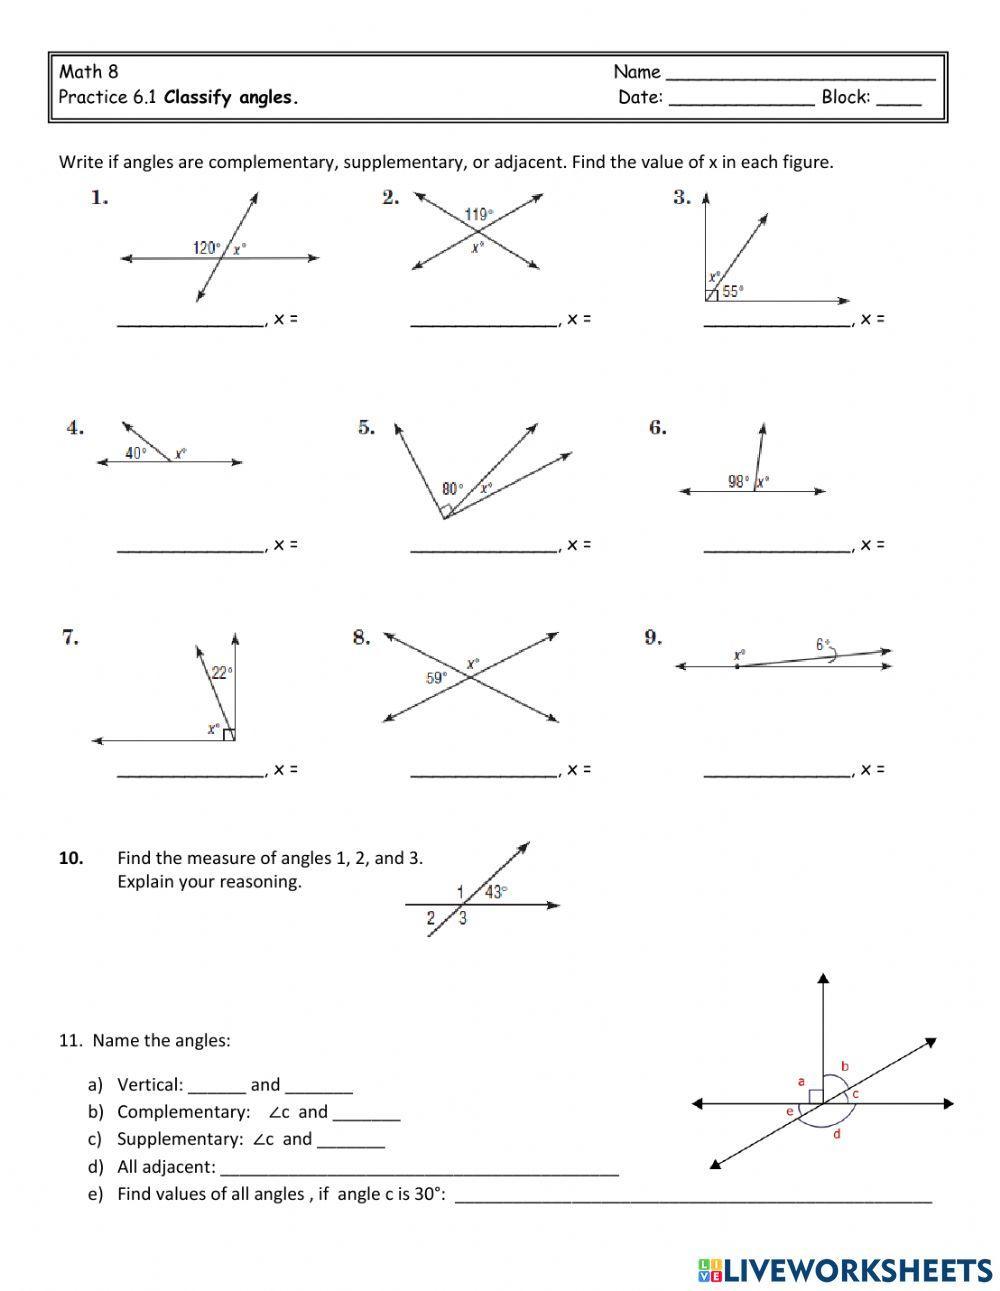 Complementary, Supplementary, and Vertical Angles Practice